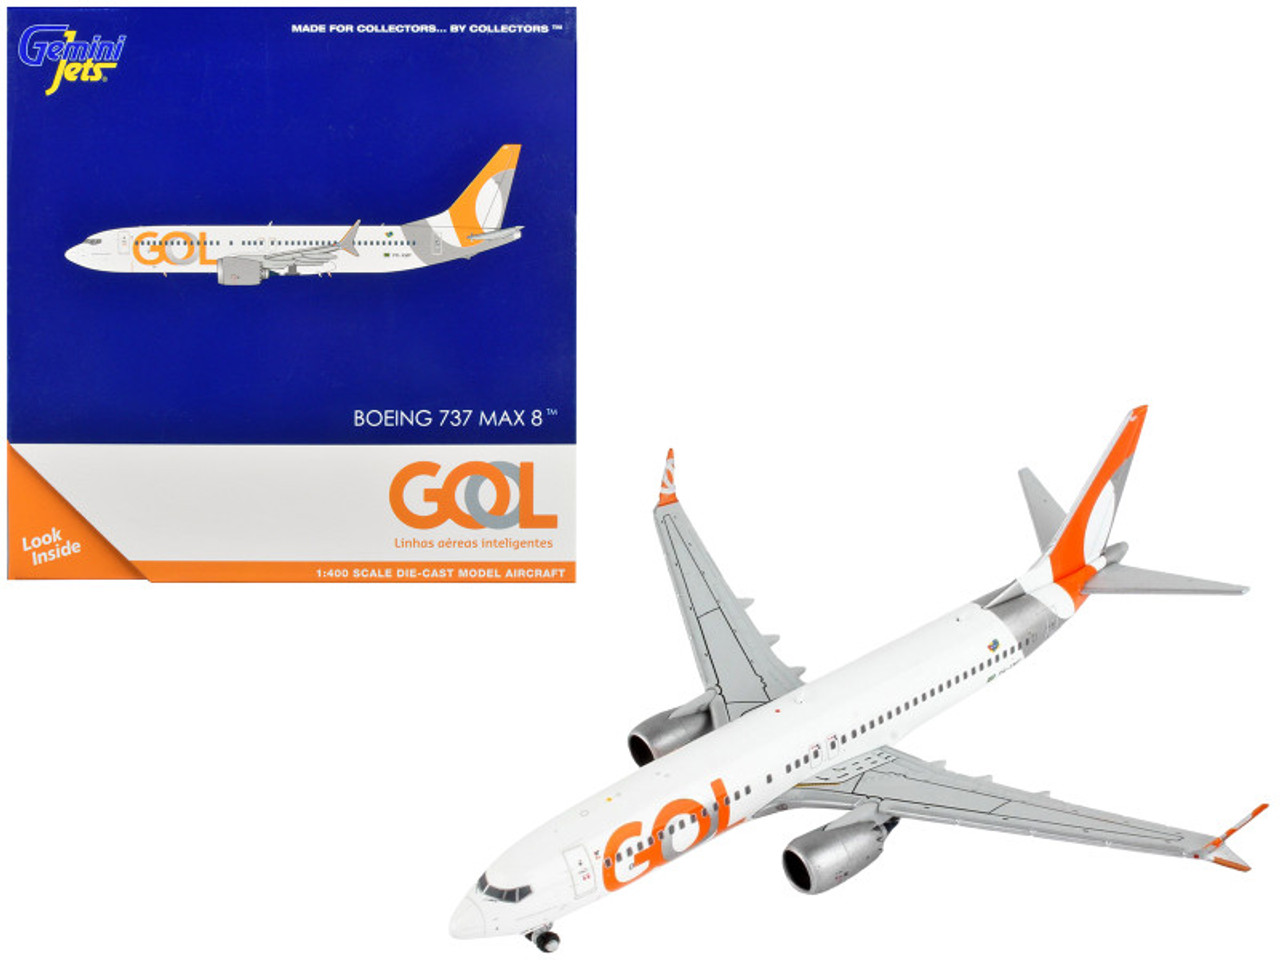 Boeing 737 MAX 8 Commercial Aircraft "Gol Linhas Aereas Inteligentes" White with Orange and Silver Tail 1/400 Diecast Model Airplane by GeminiJets